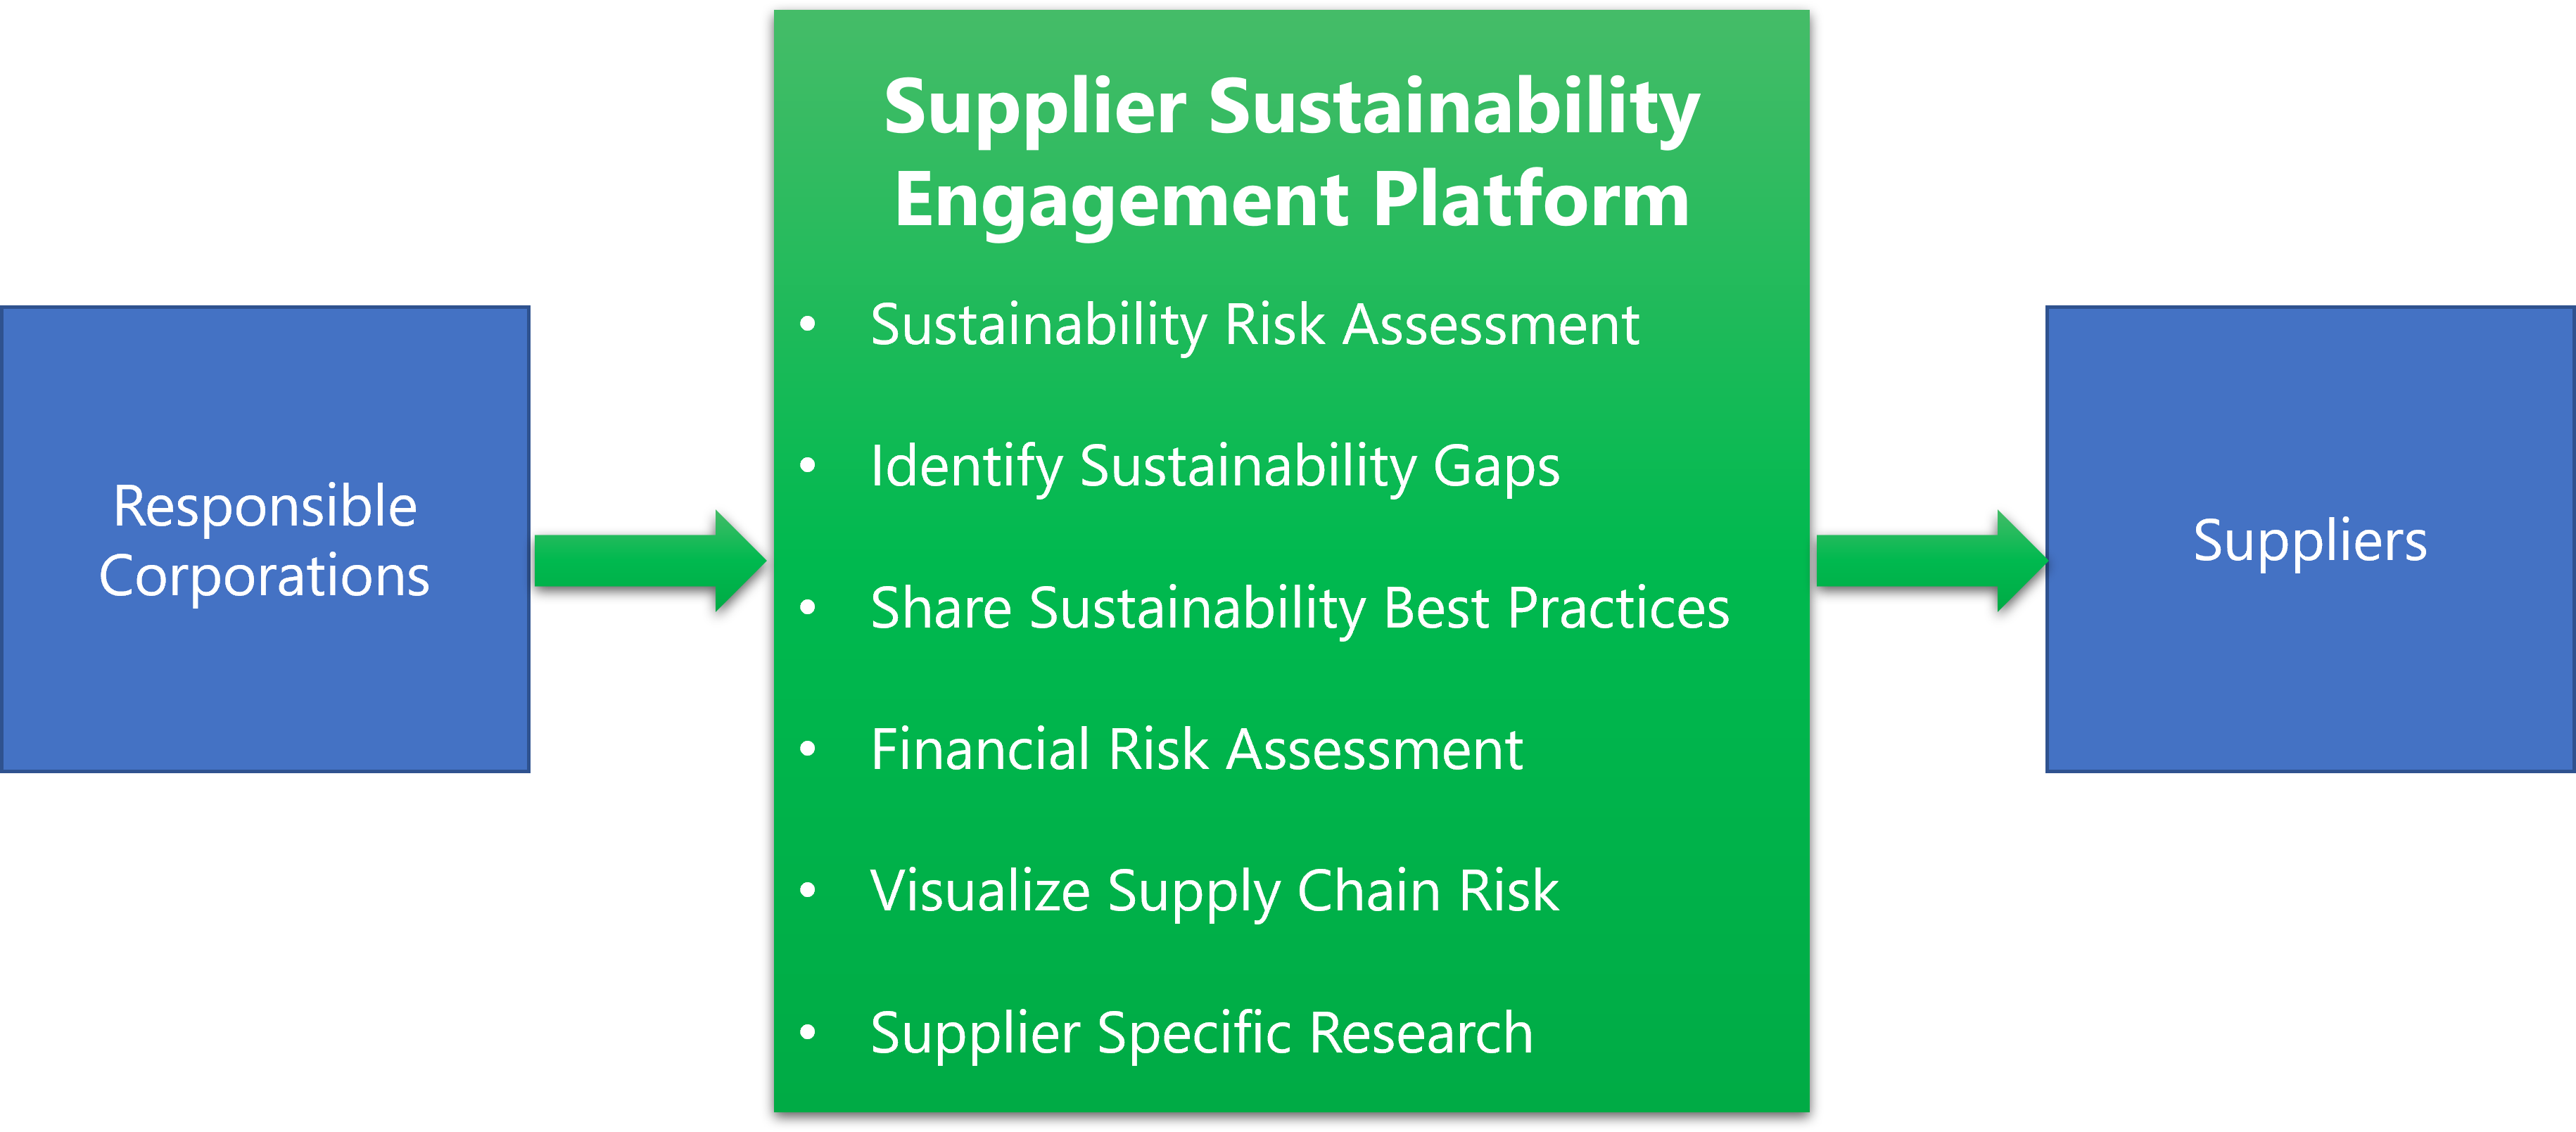 Supplier Sustainability Engagement